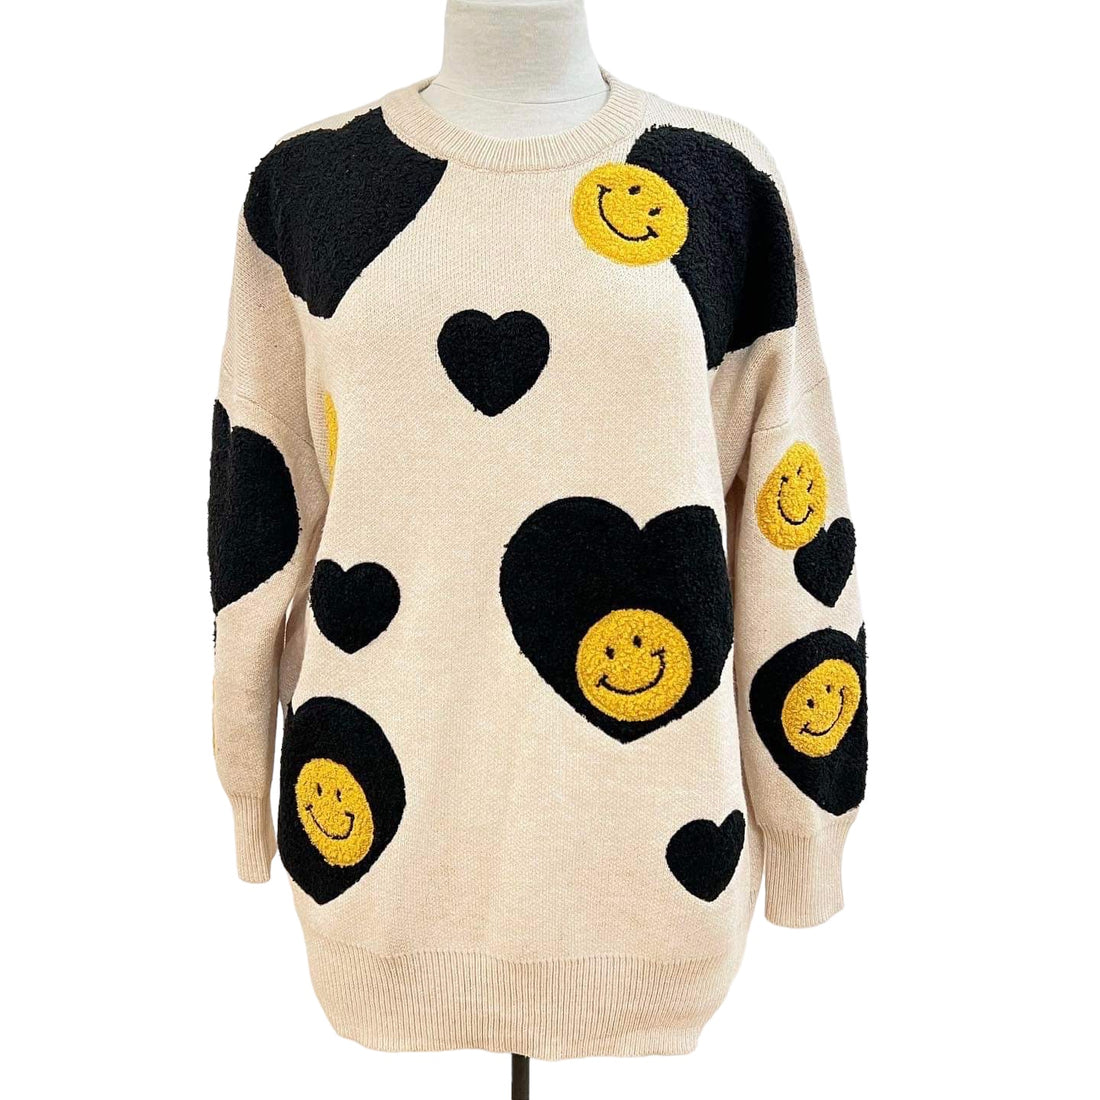 SMILEY HEART SWEATER